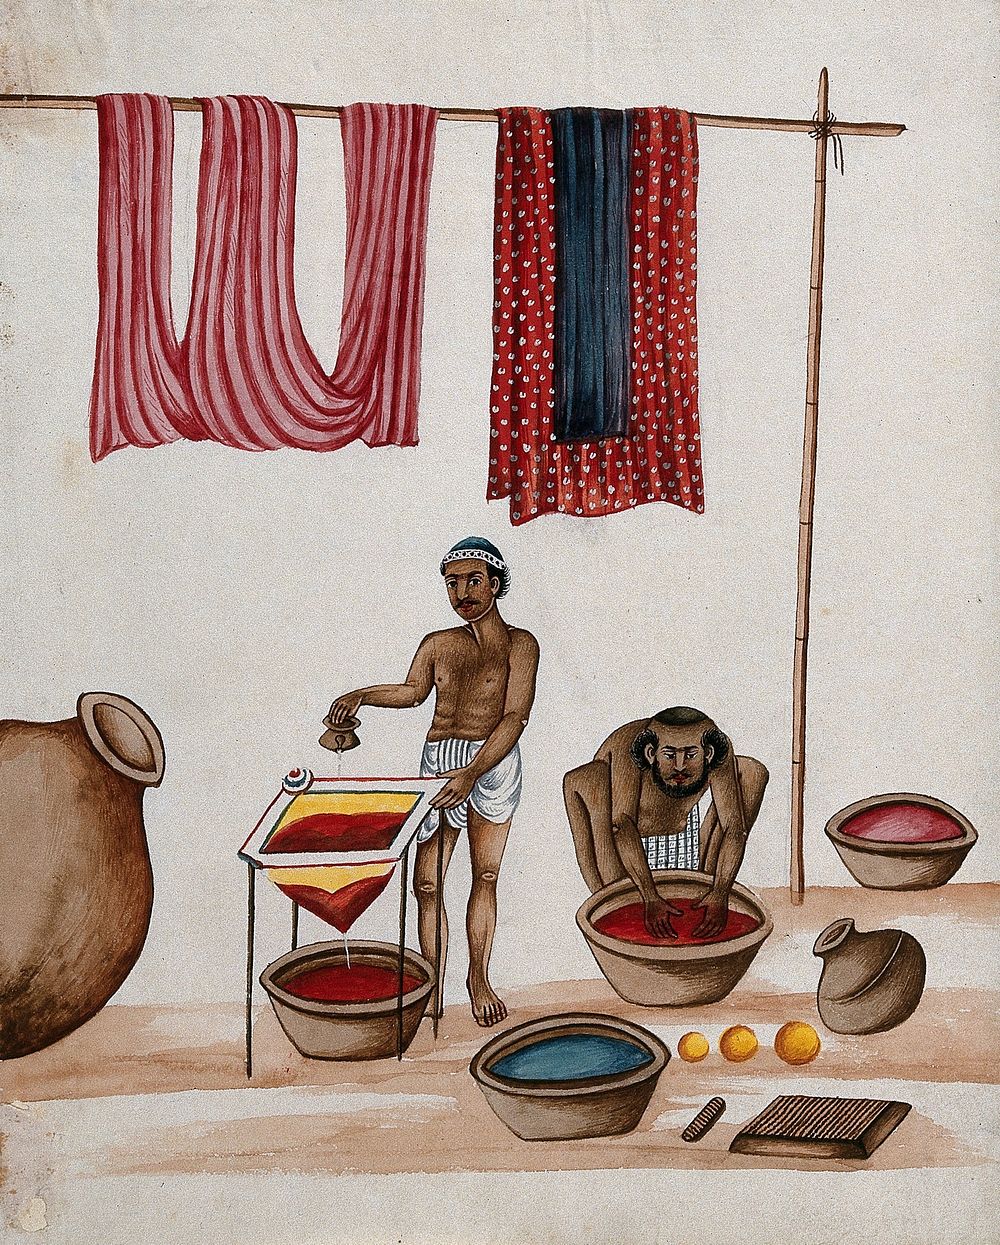 Two men preparing dye for fabric. Watercolour by an Indian painter.